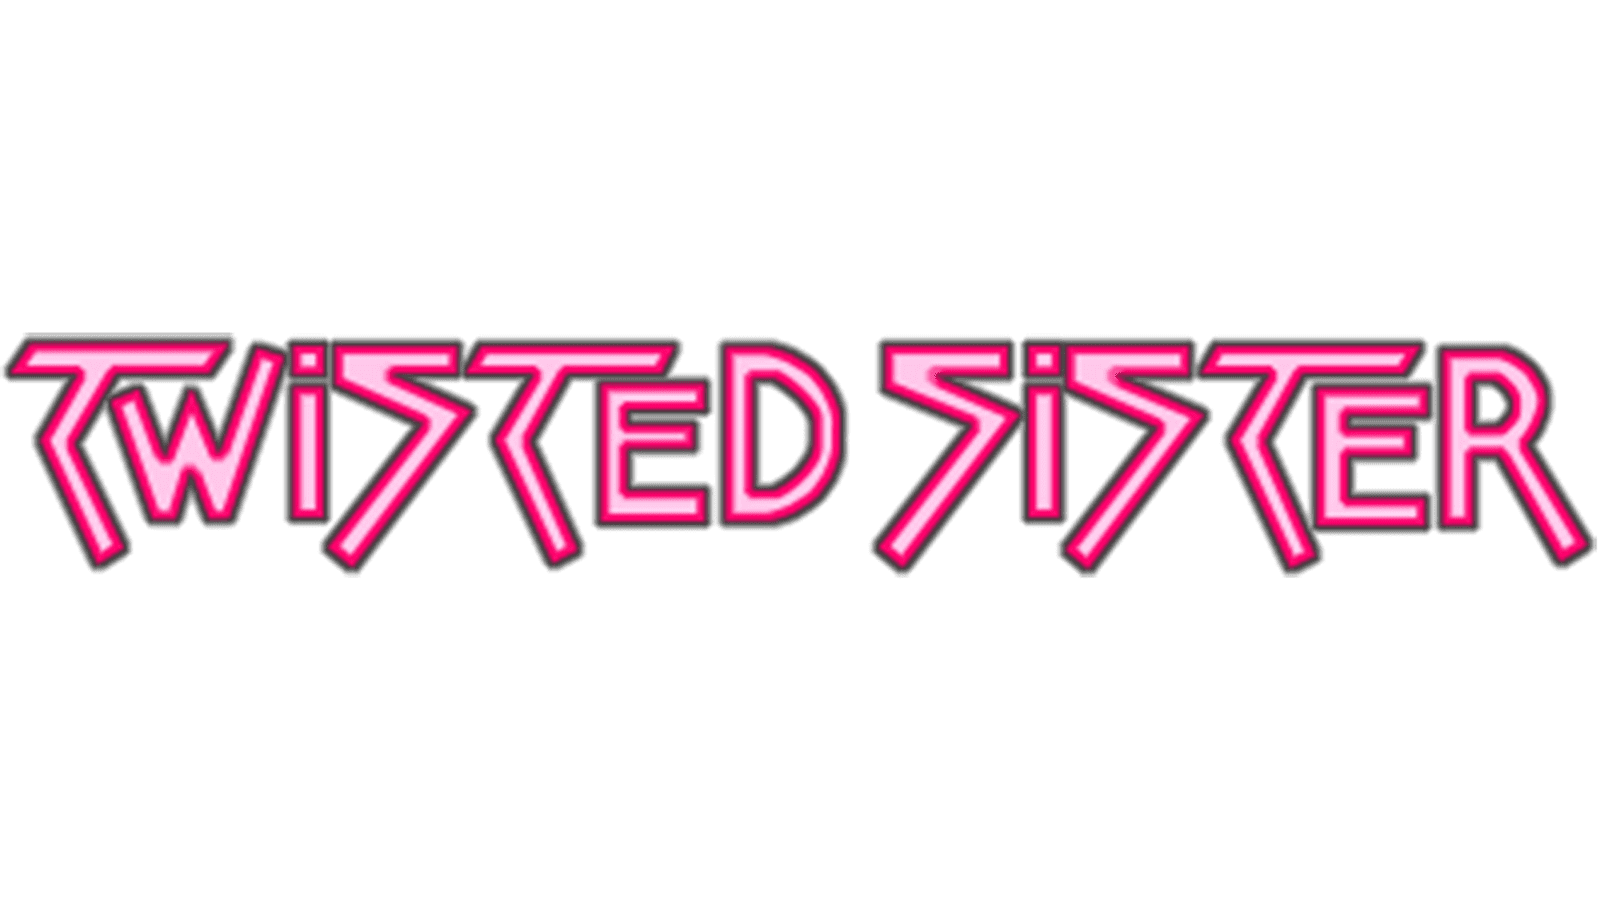 Twisted Sister logo.